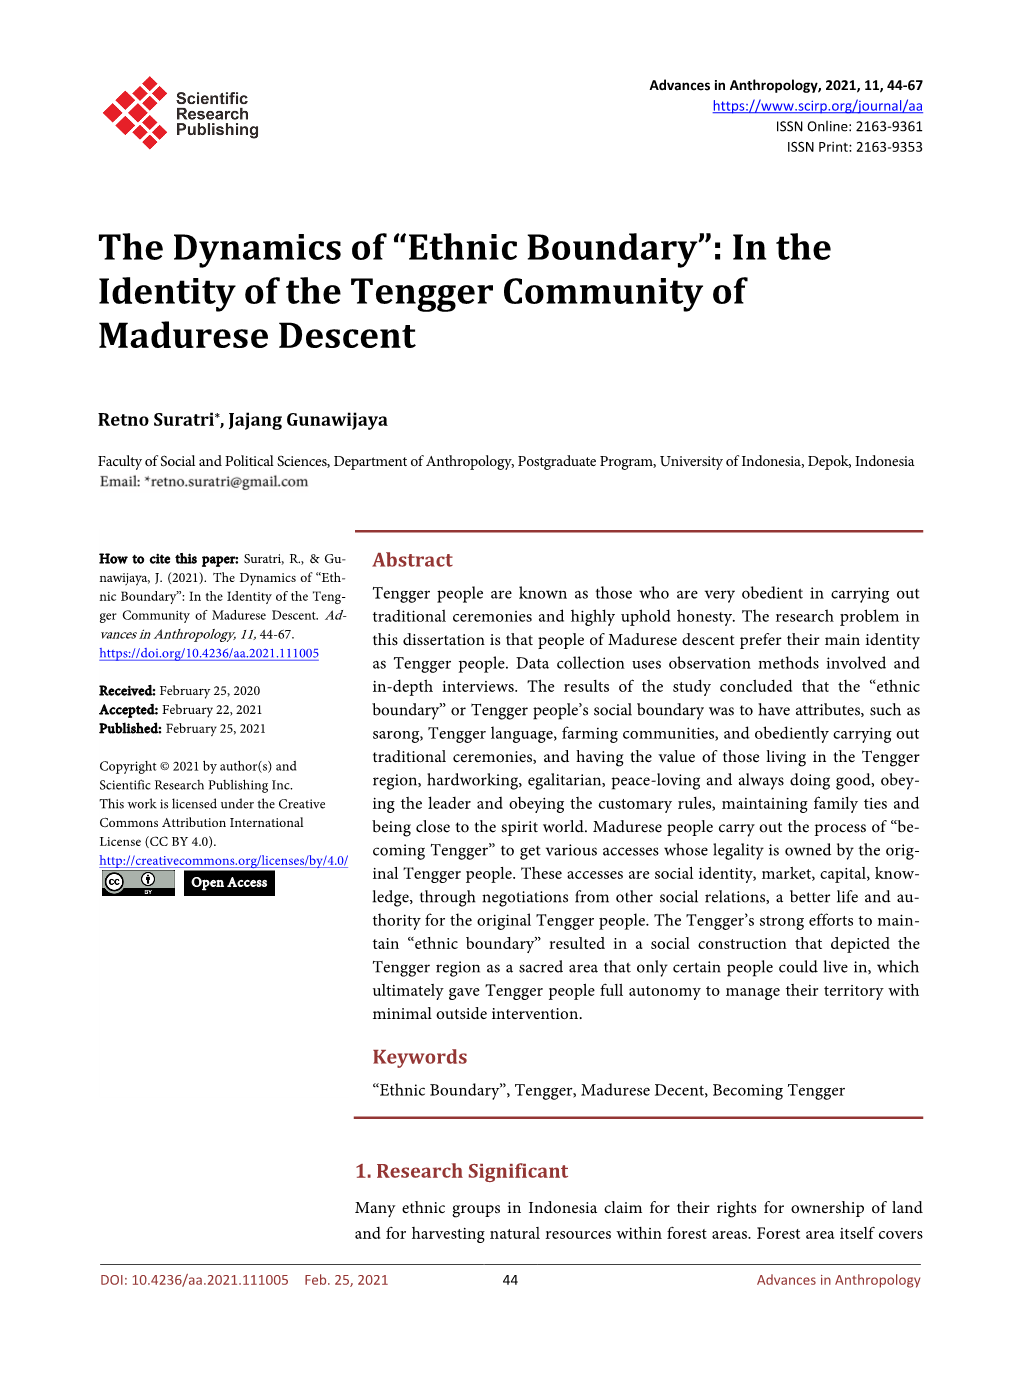 Ethnic Boundary”: in the Identity of the Tengger Community of Madurese Descent